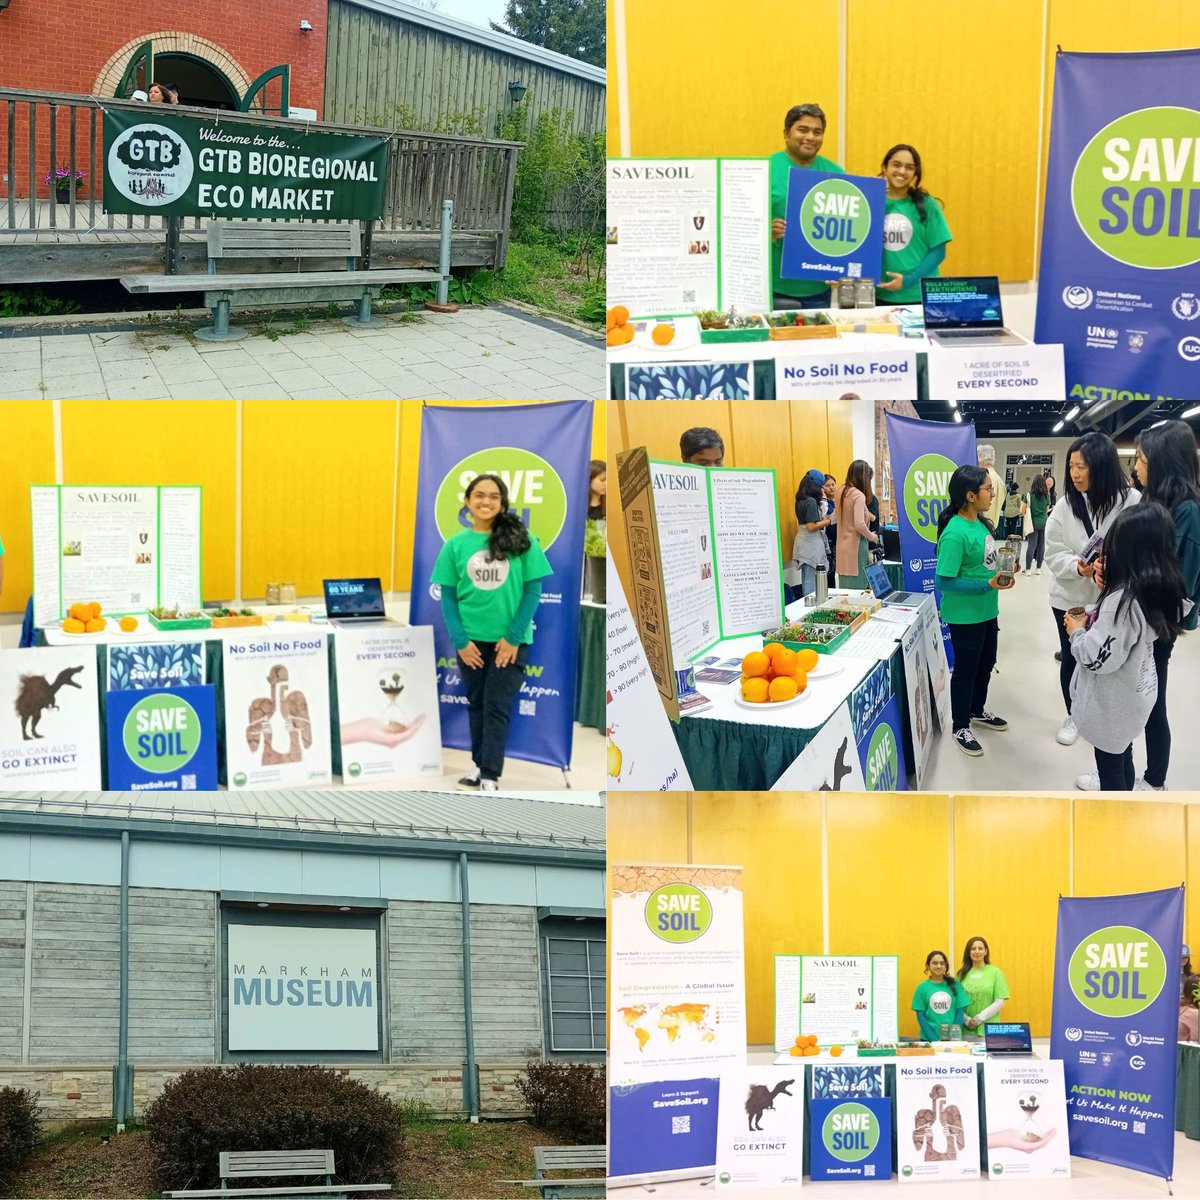 #SaveSoil at the first #GTB Bioregional Eco Market, Markham Museum. @legacycubed A beautiful celebration of learning & legacies across generations towards a regenerative future🌿🌏 Kudos to earthbuddy, Saanvi Tonse for making it happen!#MothersDay #ConsciousPlanet @cpsavesoil